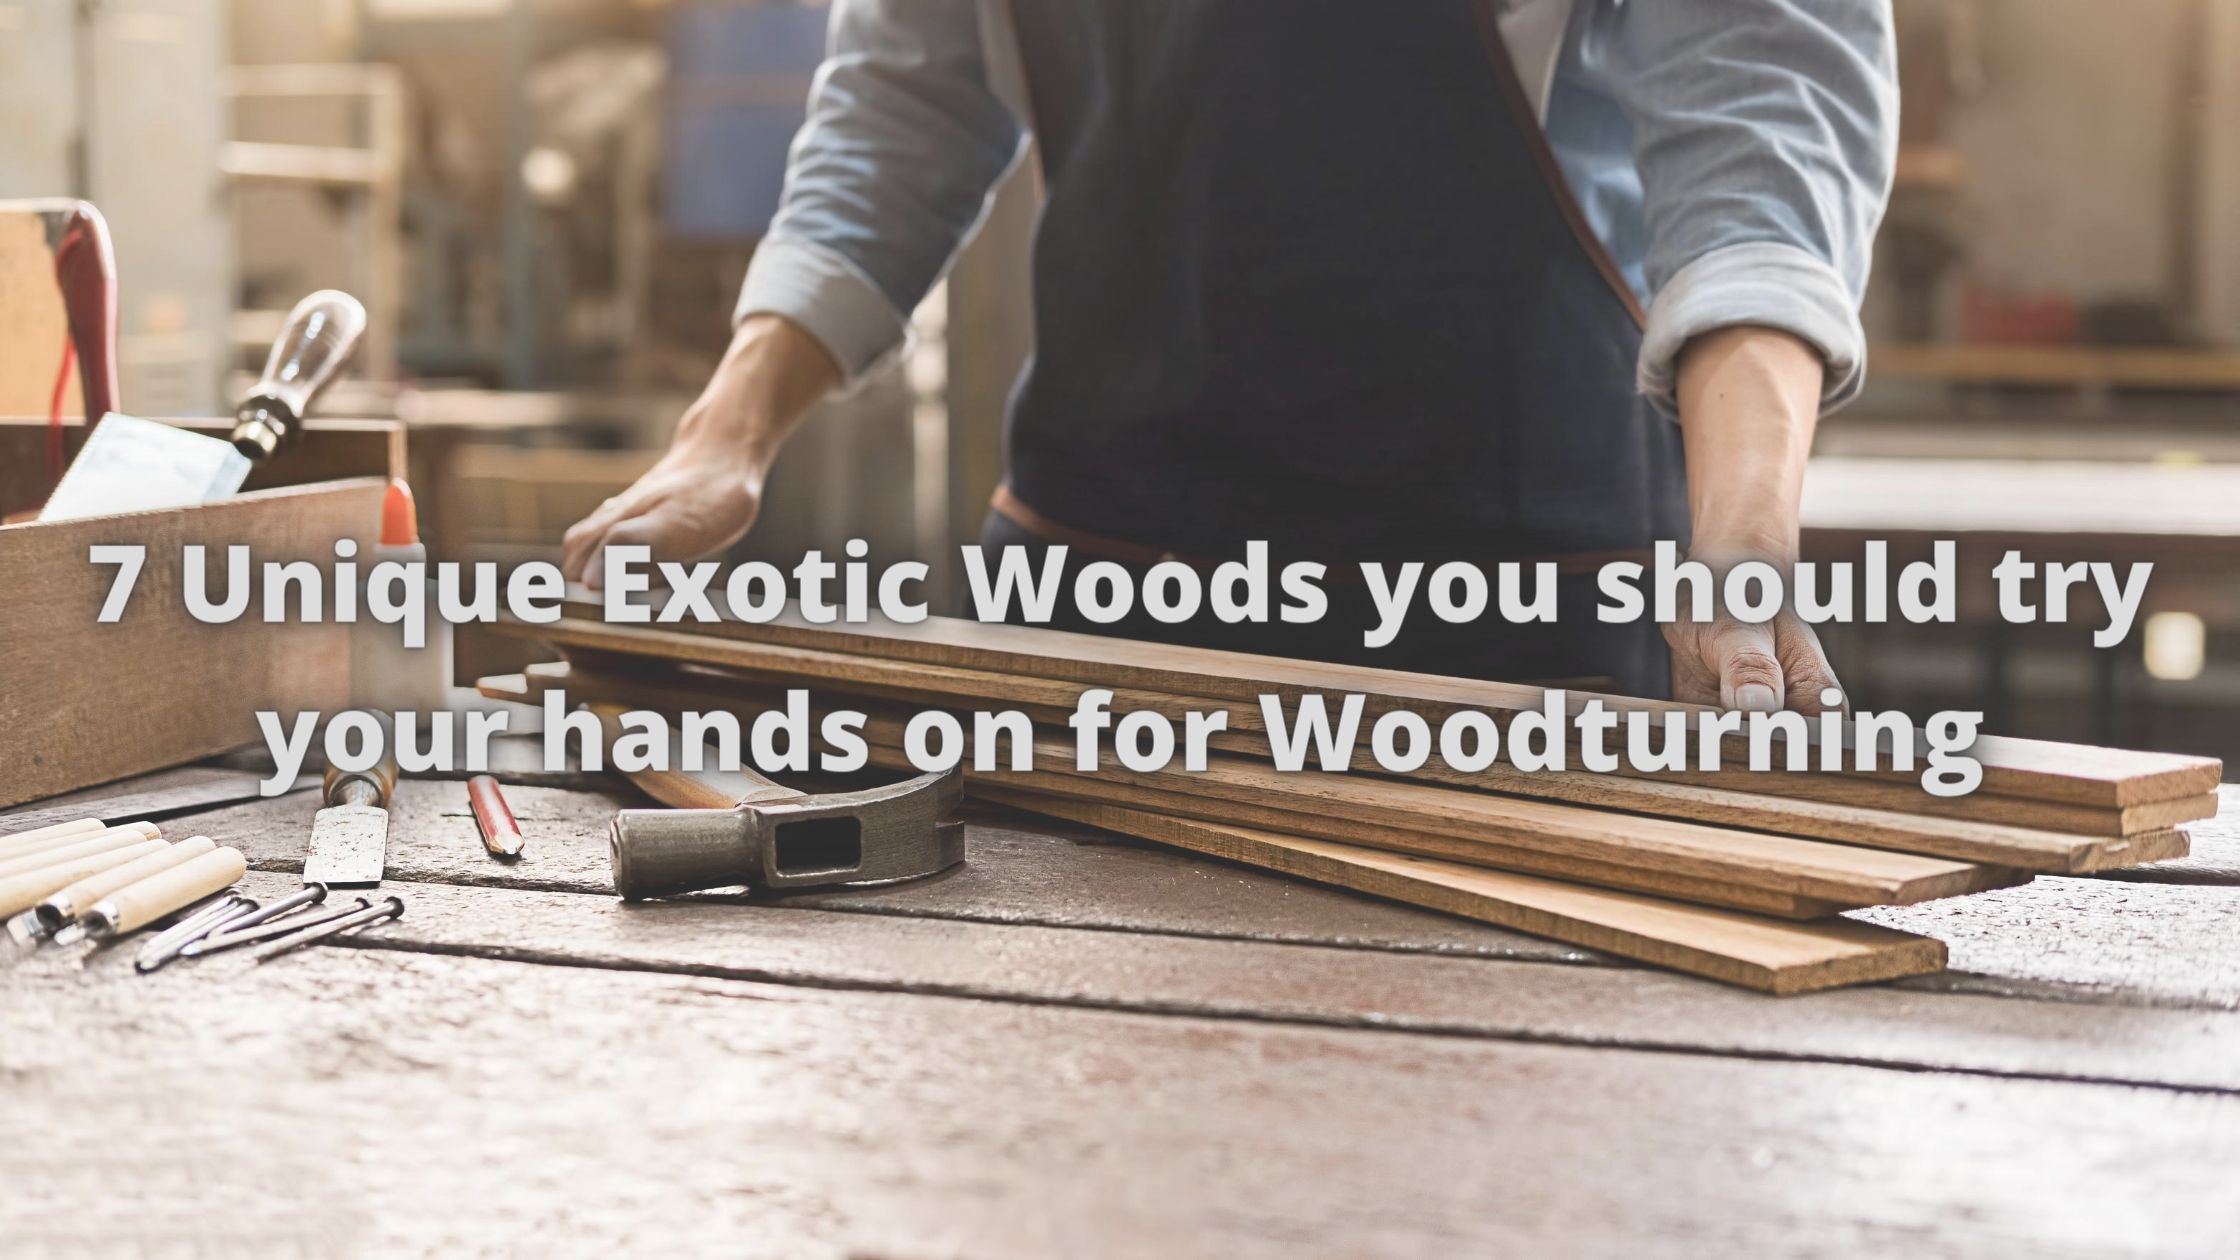 7 Unique Exotic Woods you should try your hands on for Woodturning - Exotic Wood Zone 